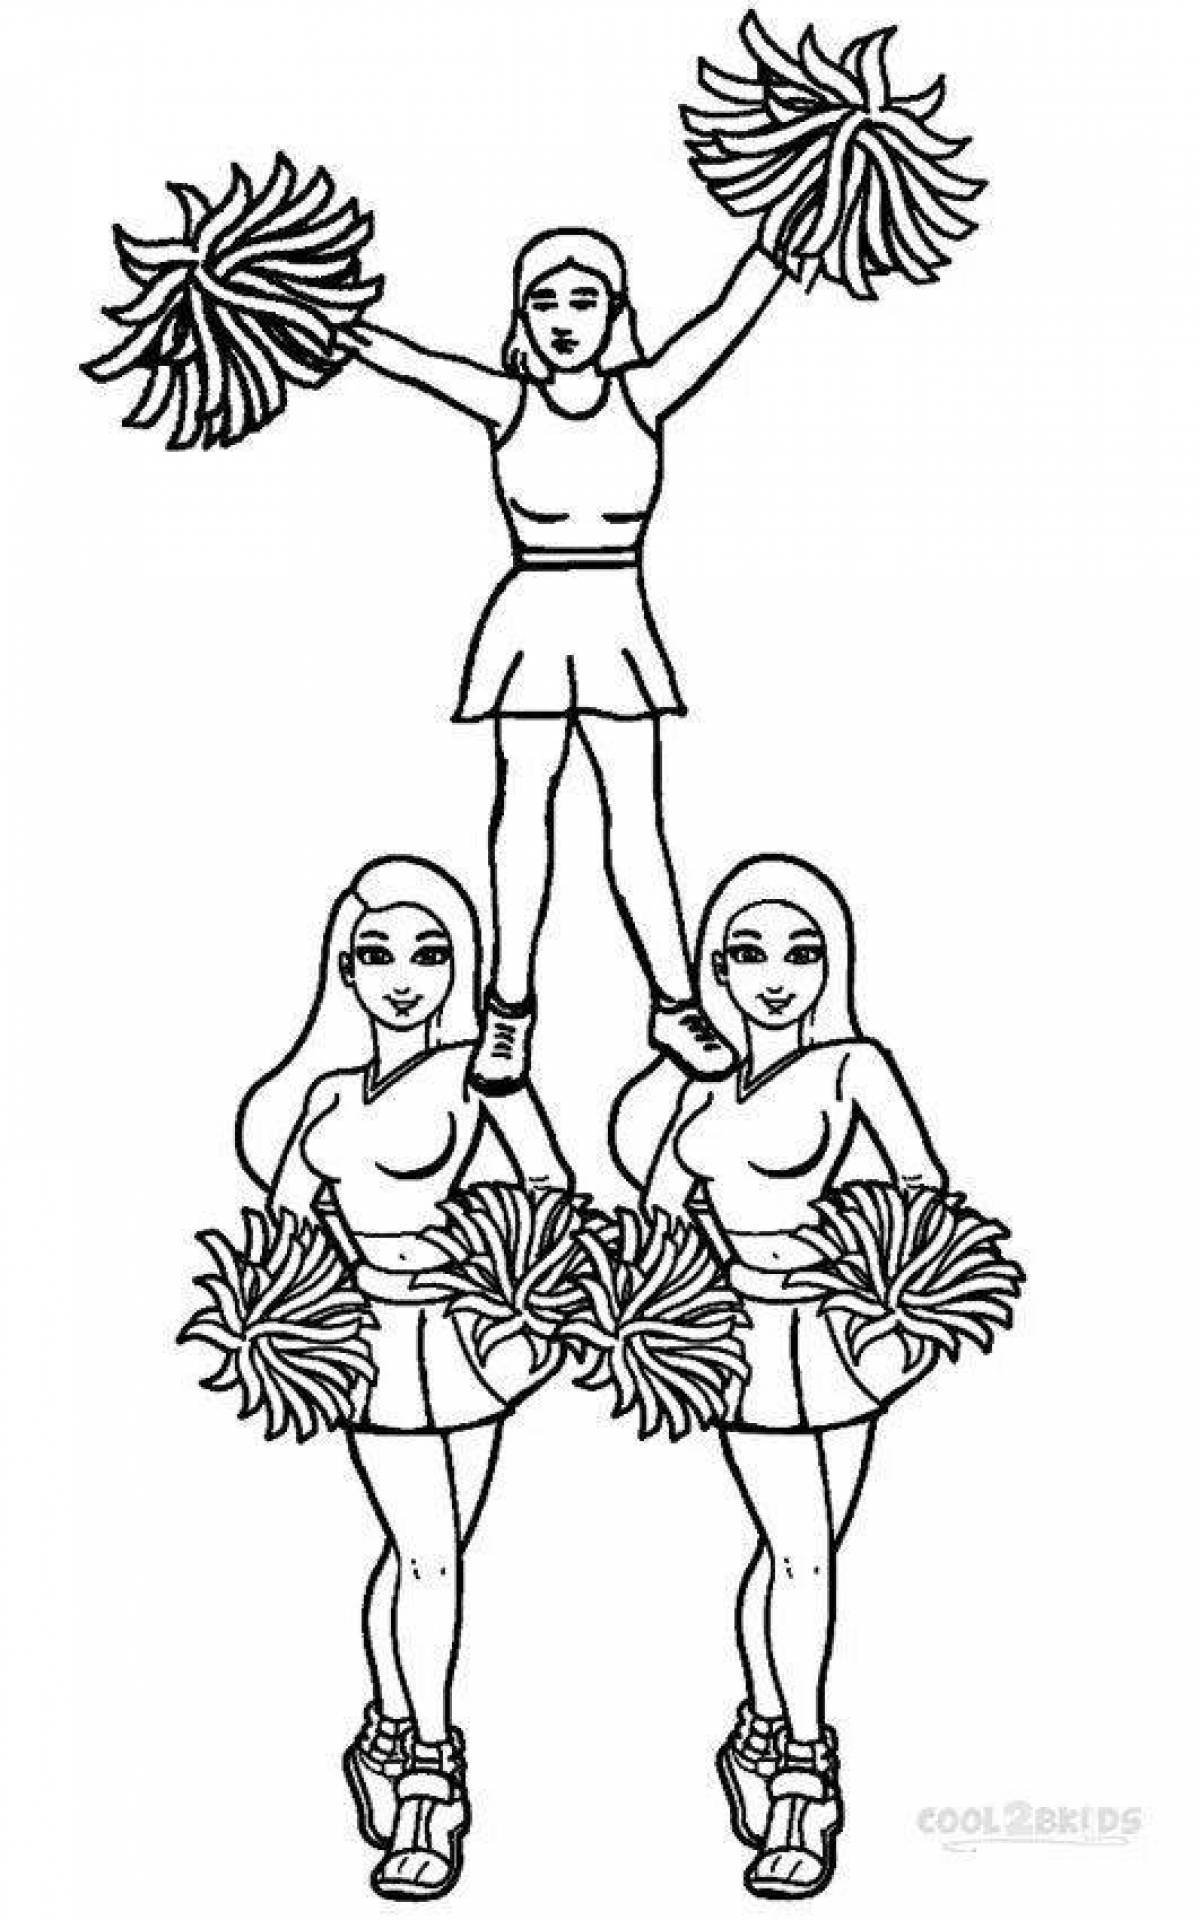 Cheerleader dynamic coloring page